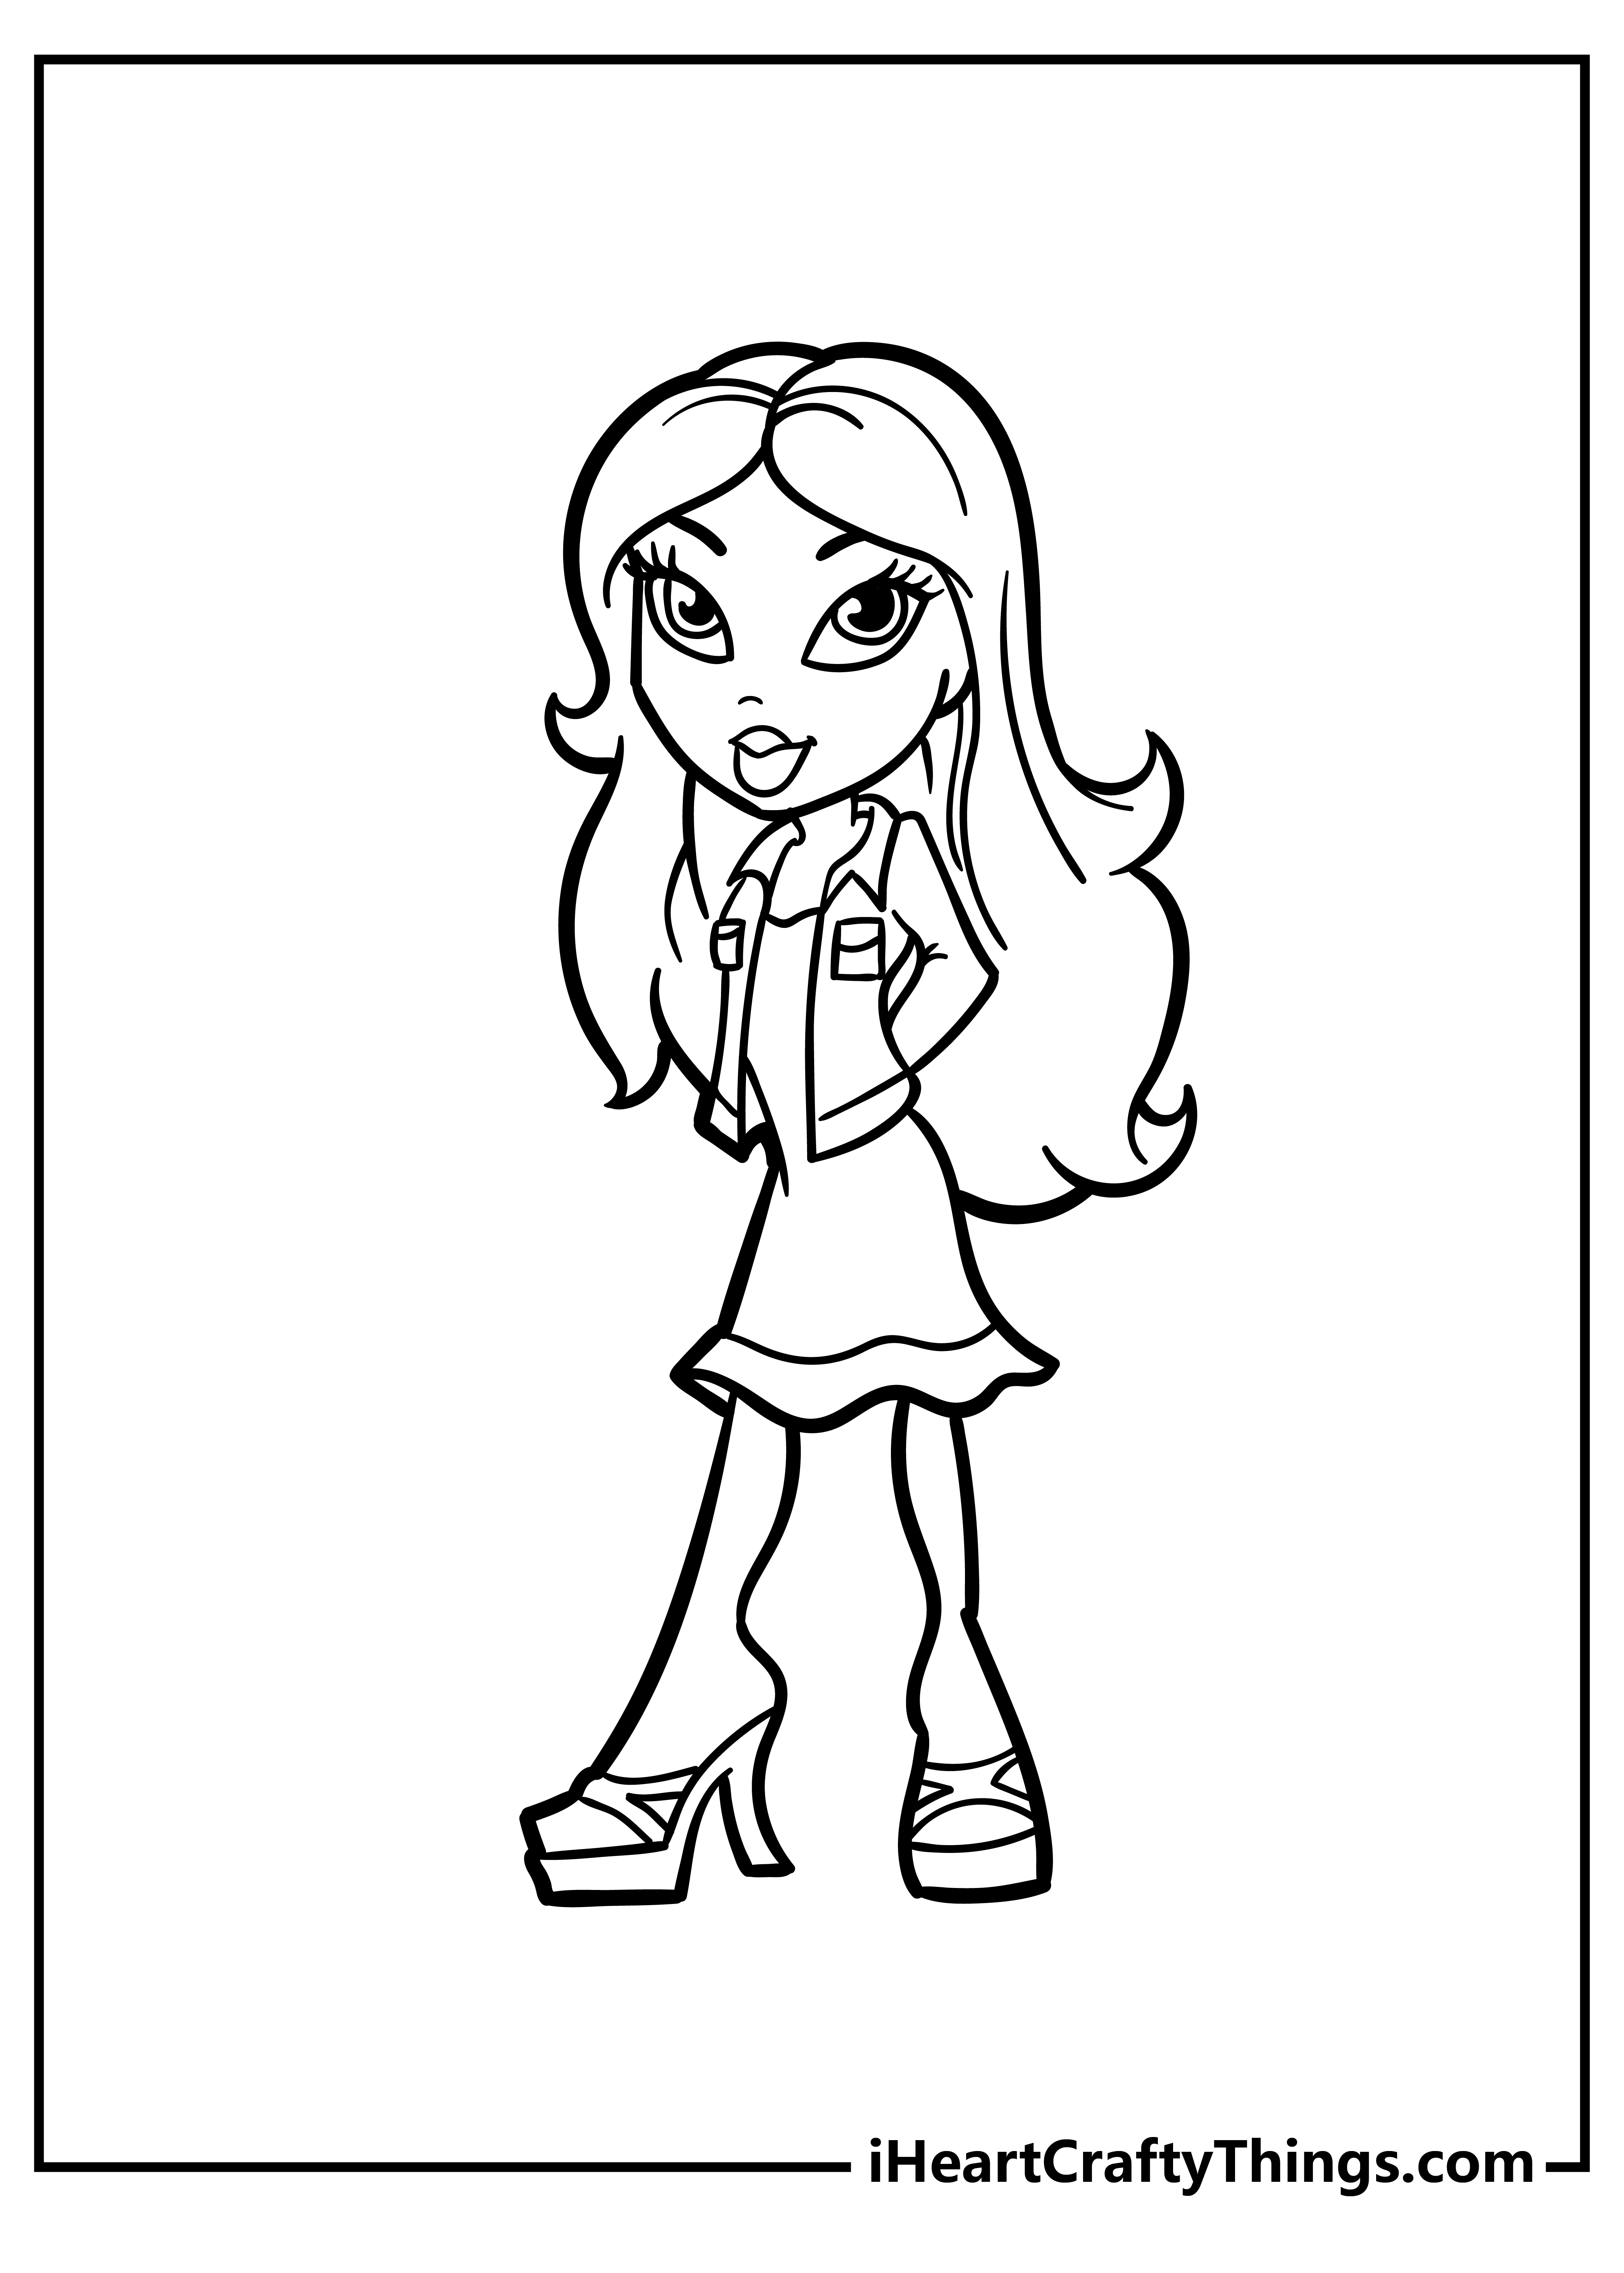 Bratz Coloring Pages for preschoolers free printable